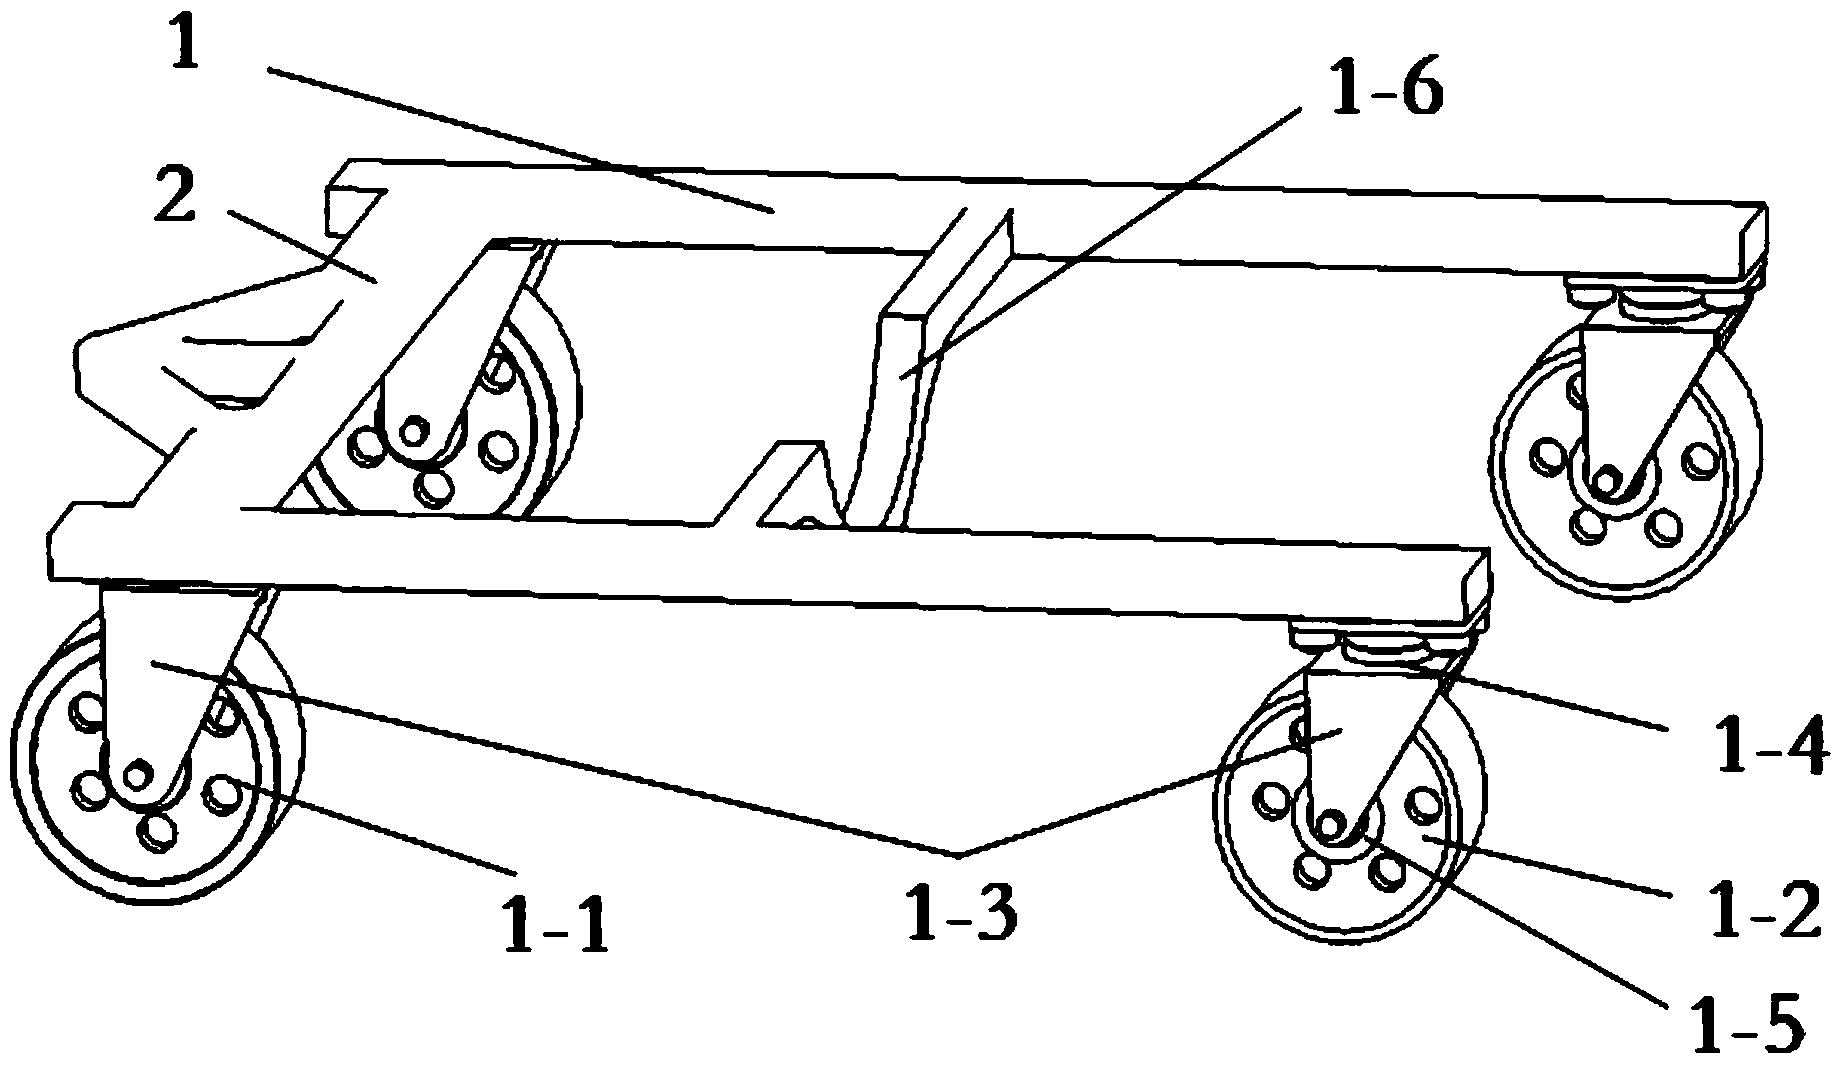 Semi-automatic loading device of barrelled water